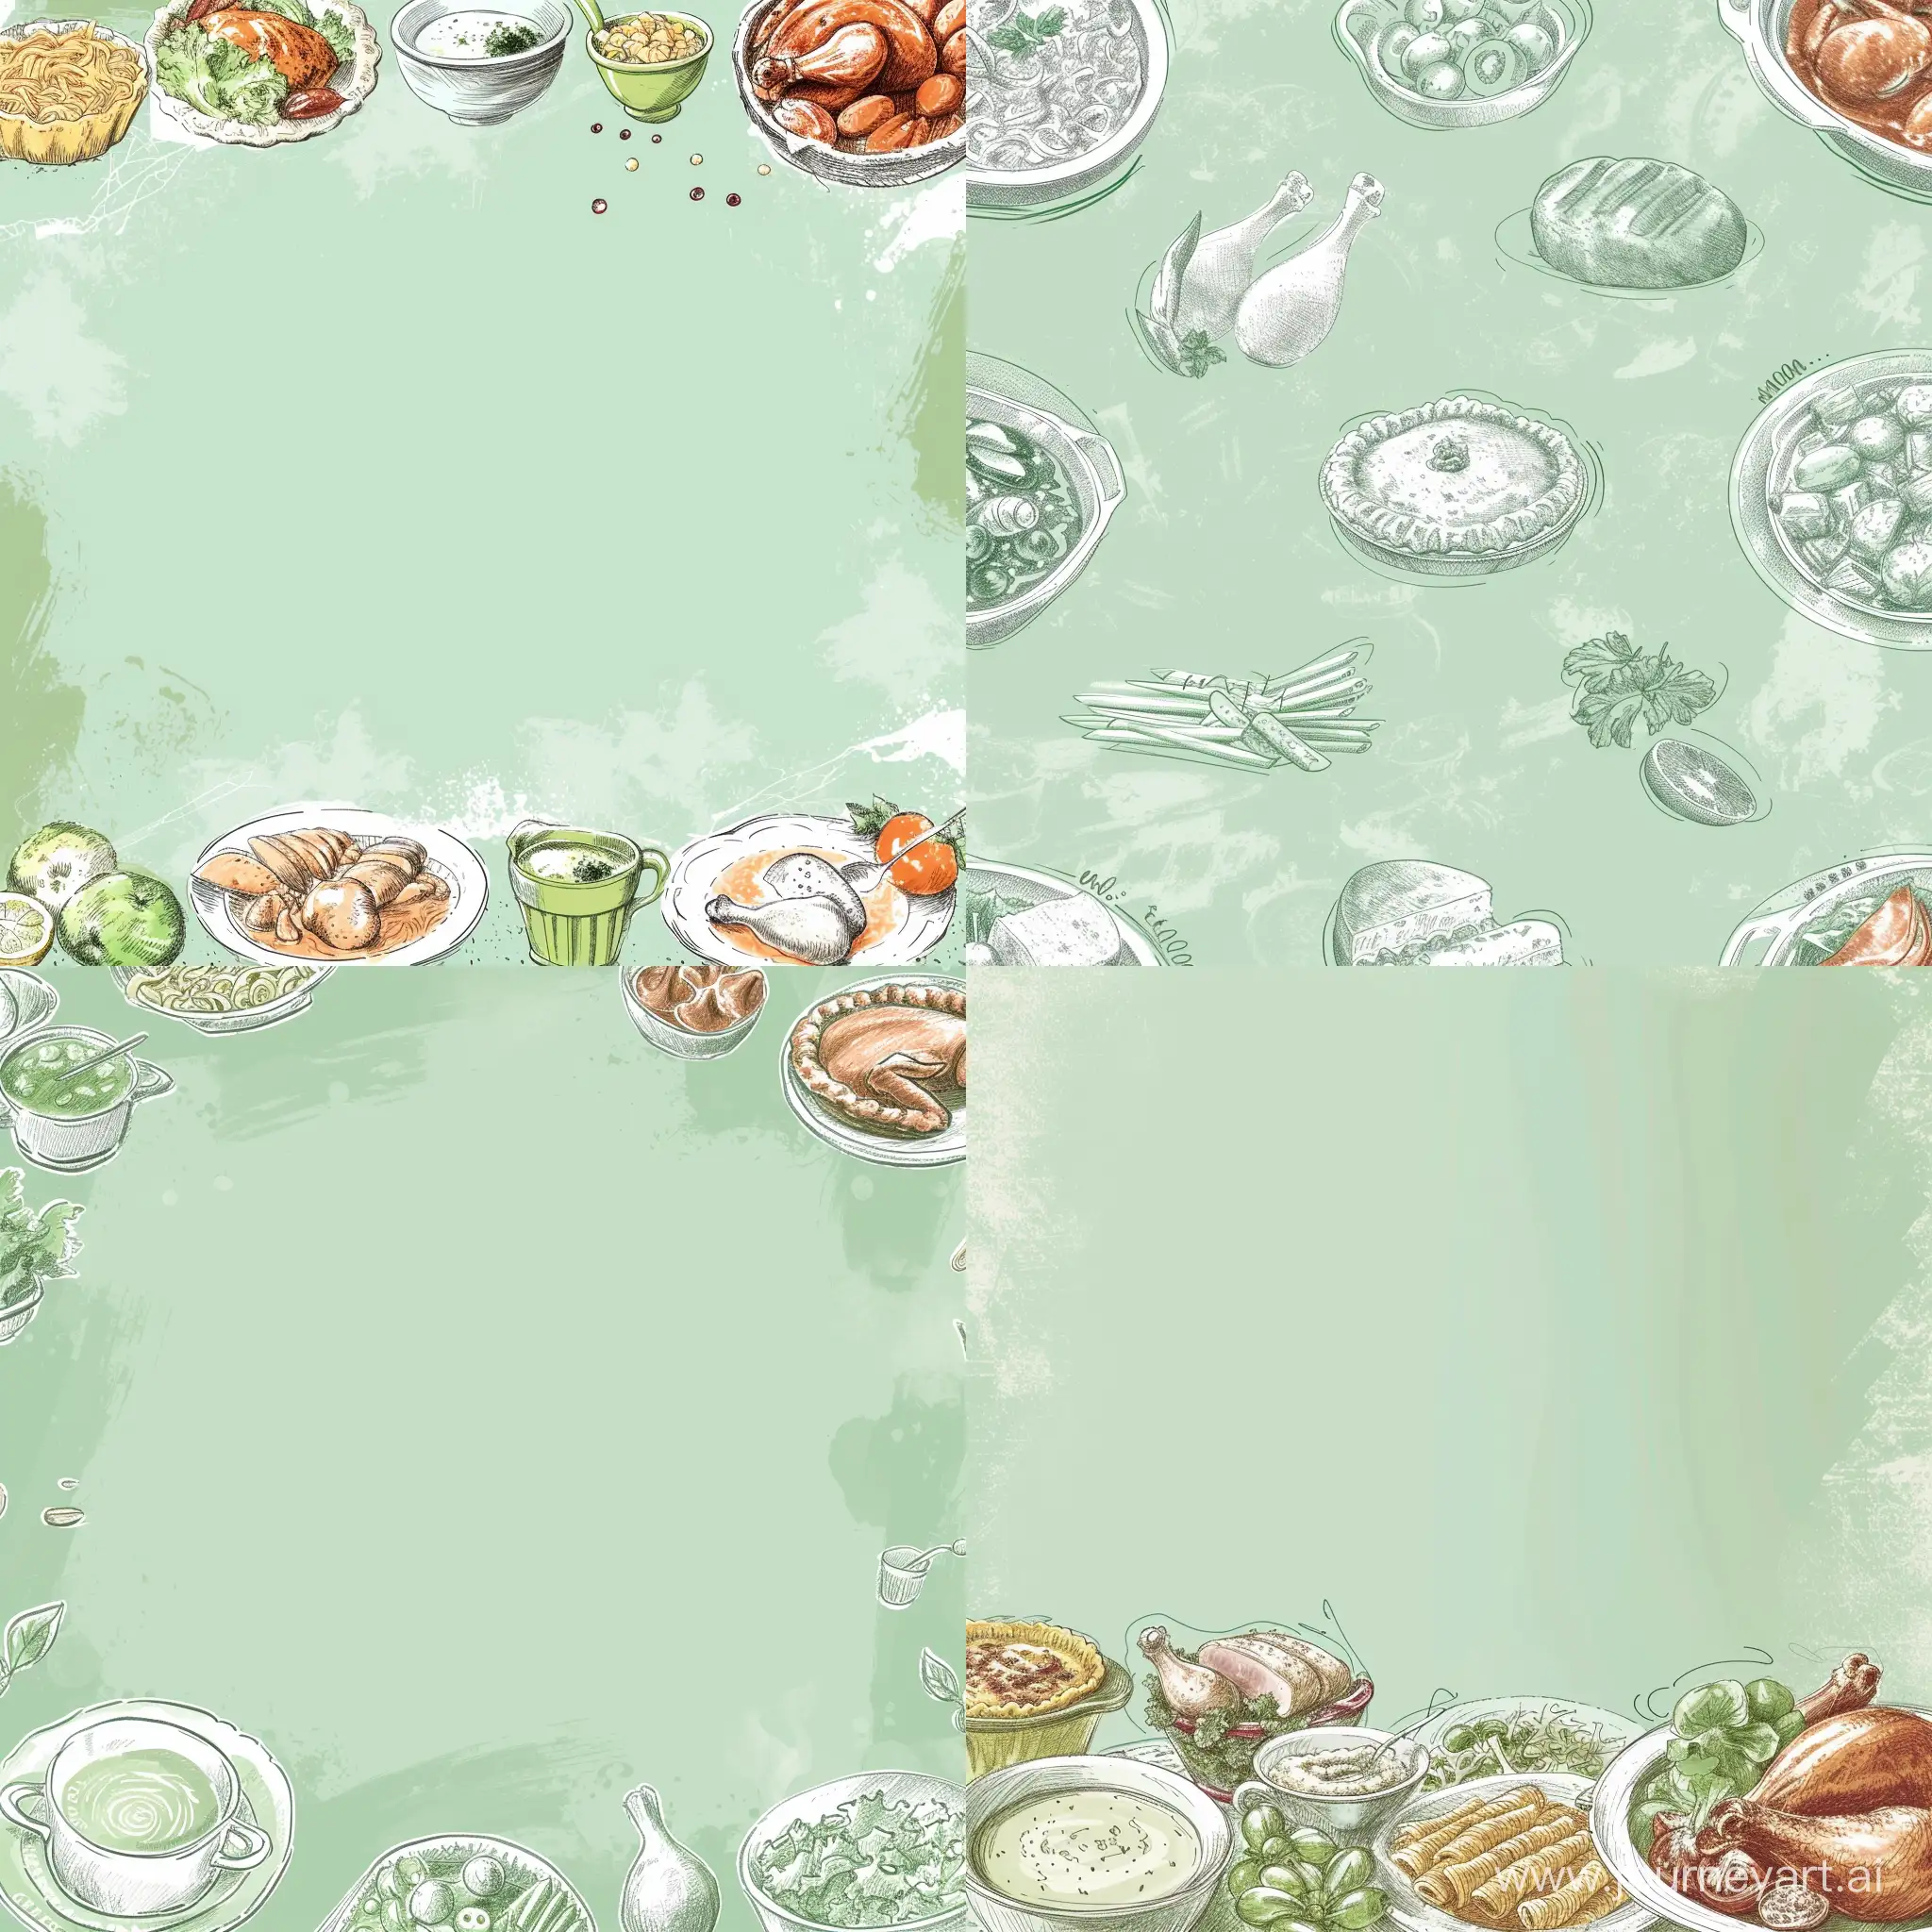 Delicious-Culinary-Medley-on-Sketchy-Mint-Green-Background